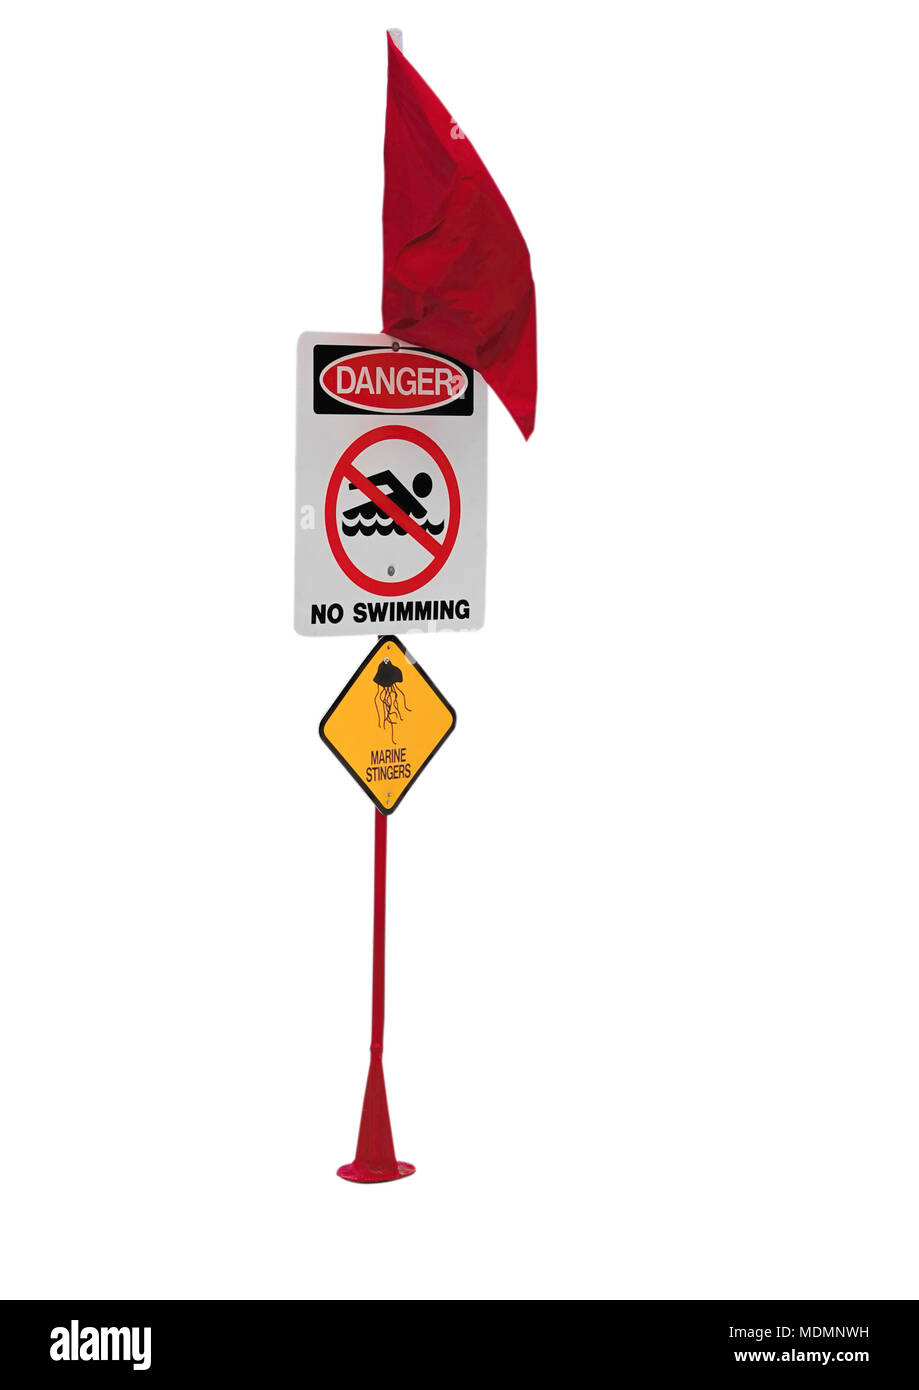 Danger red flag sign on a white background Stock Photo